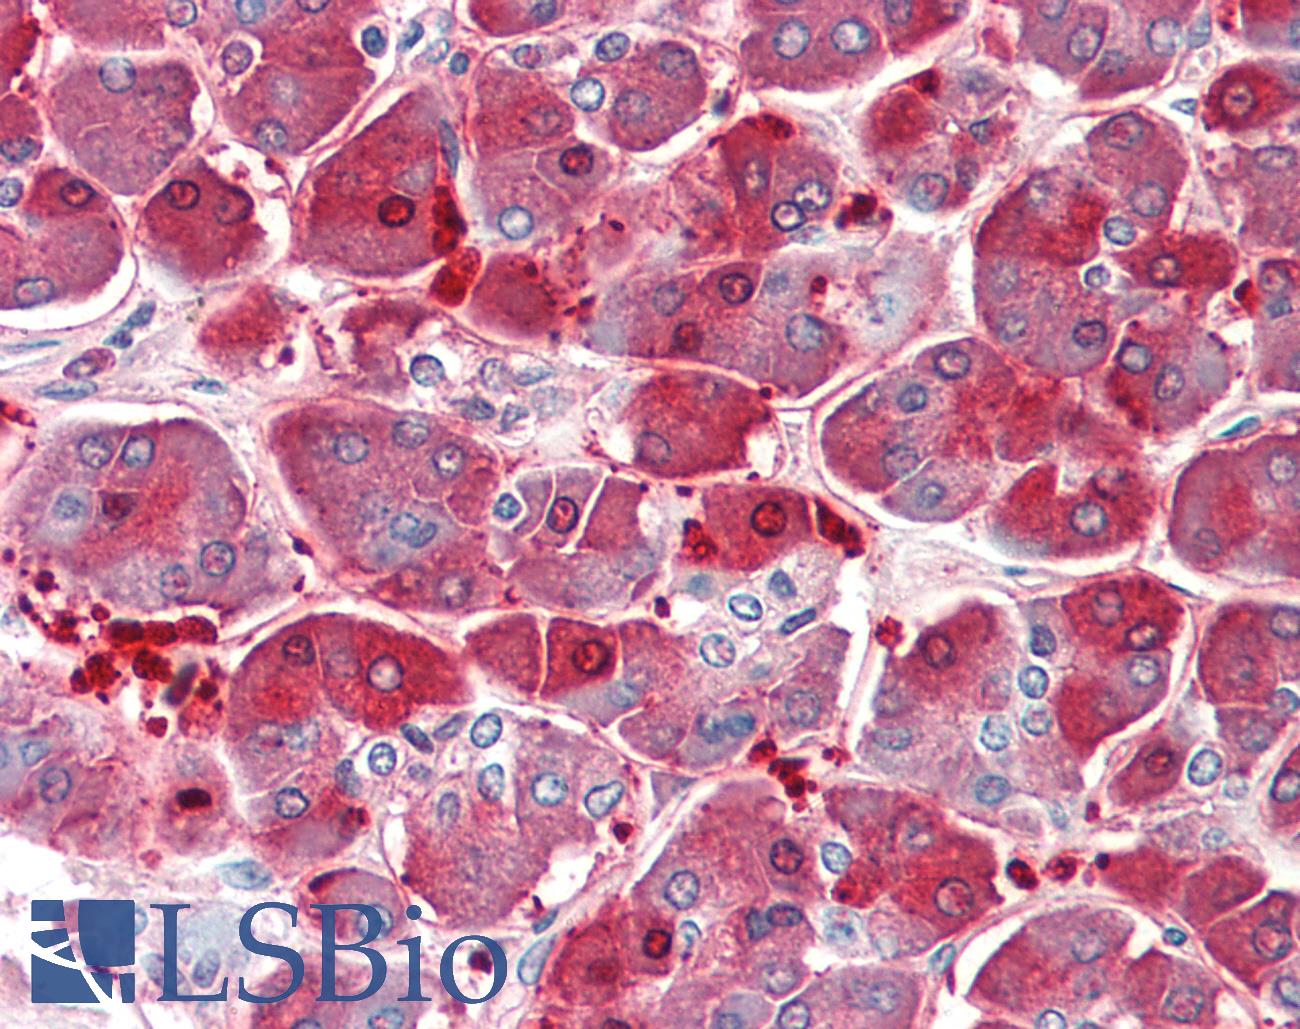 XPNPEP1 / Aminopeptidase P Antibody - Anti-XPNPEP1 / Aminopeptidase P antibody IHC staining of human pancreas. Immunohistochemistry of formalin-fixed, paraffin-embedded tissue after heat-induced antigen retrieval. Antibody concentration 5 ug/ml.